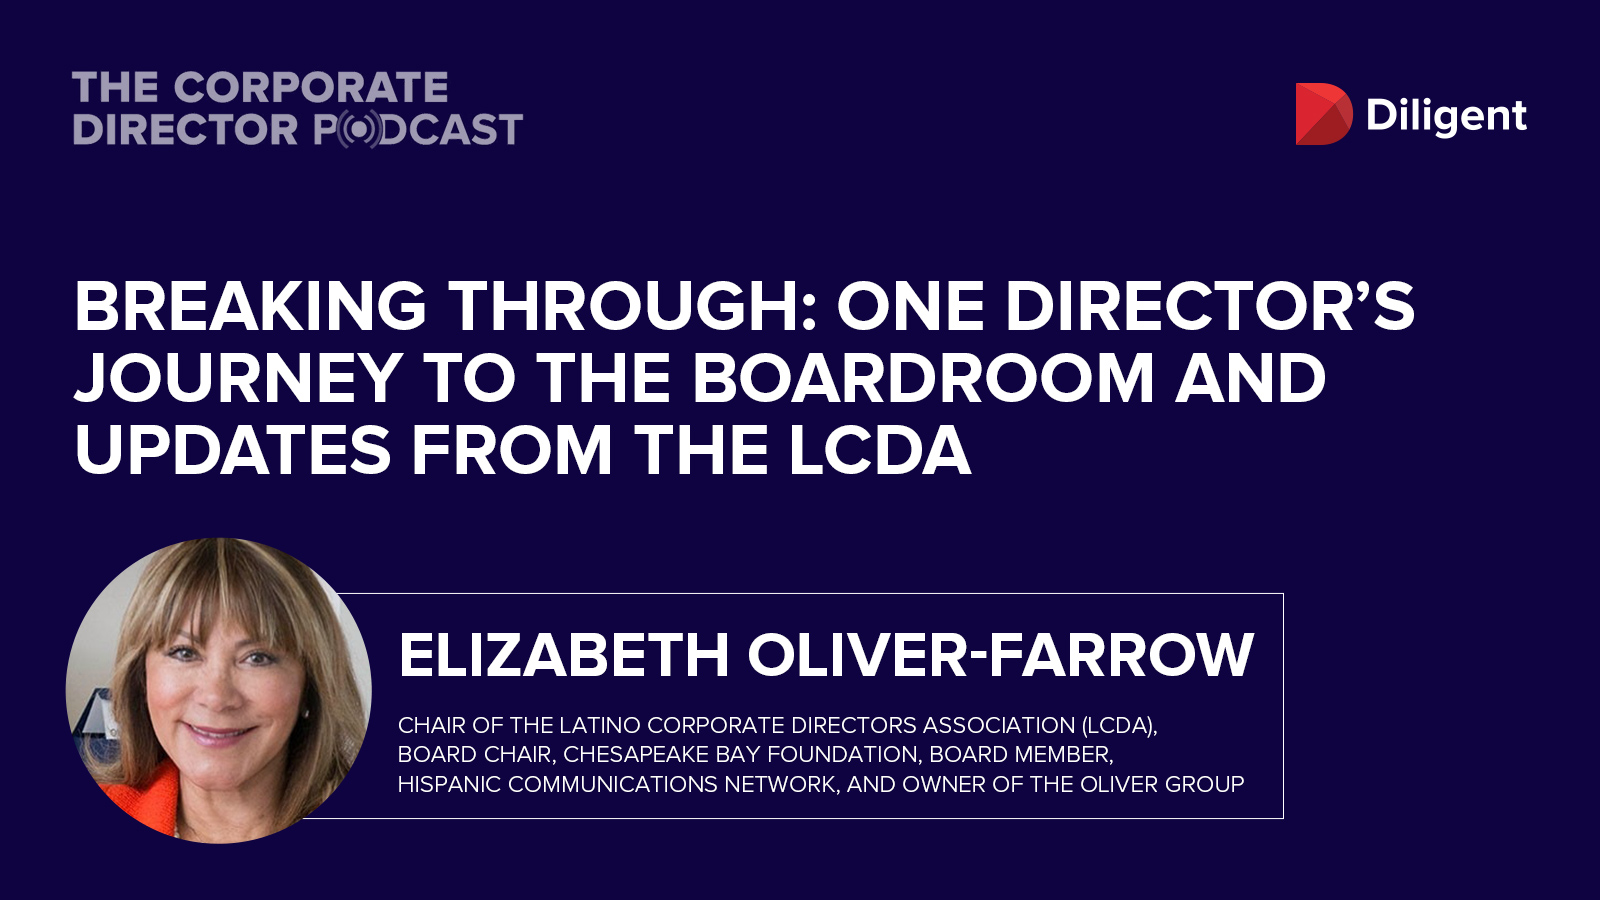 Diligent Corporate Director Podcast Breaking Through One Directors Journey to the Boardroom and Updates from the LCDA